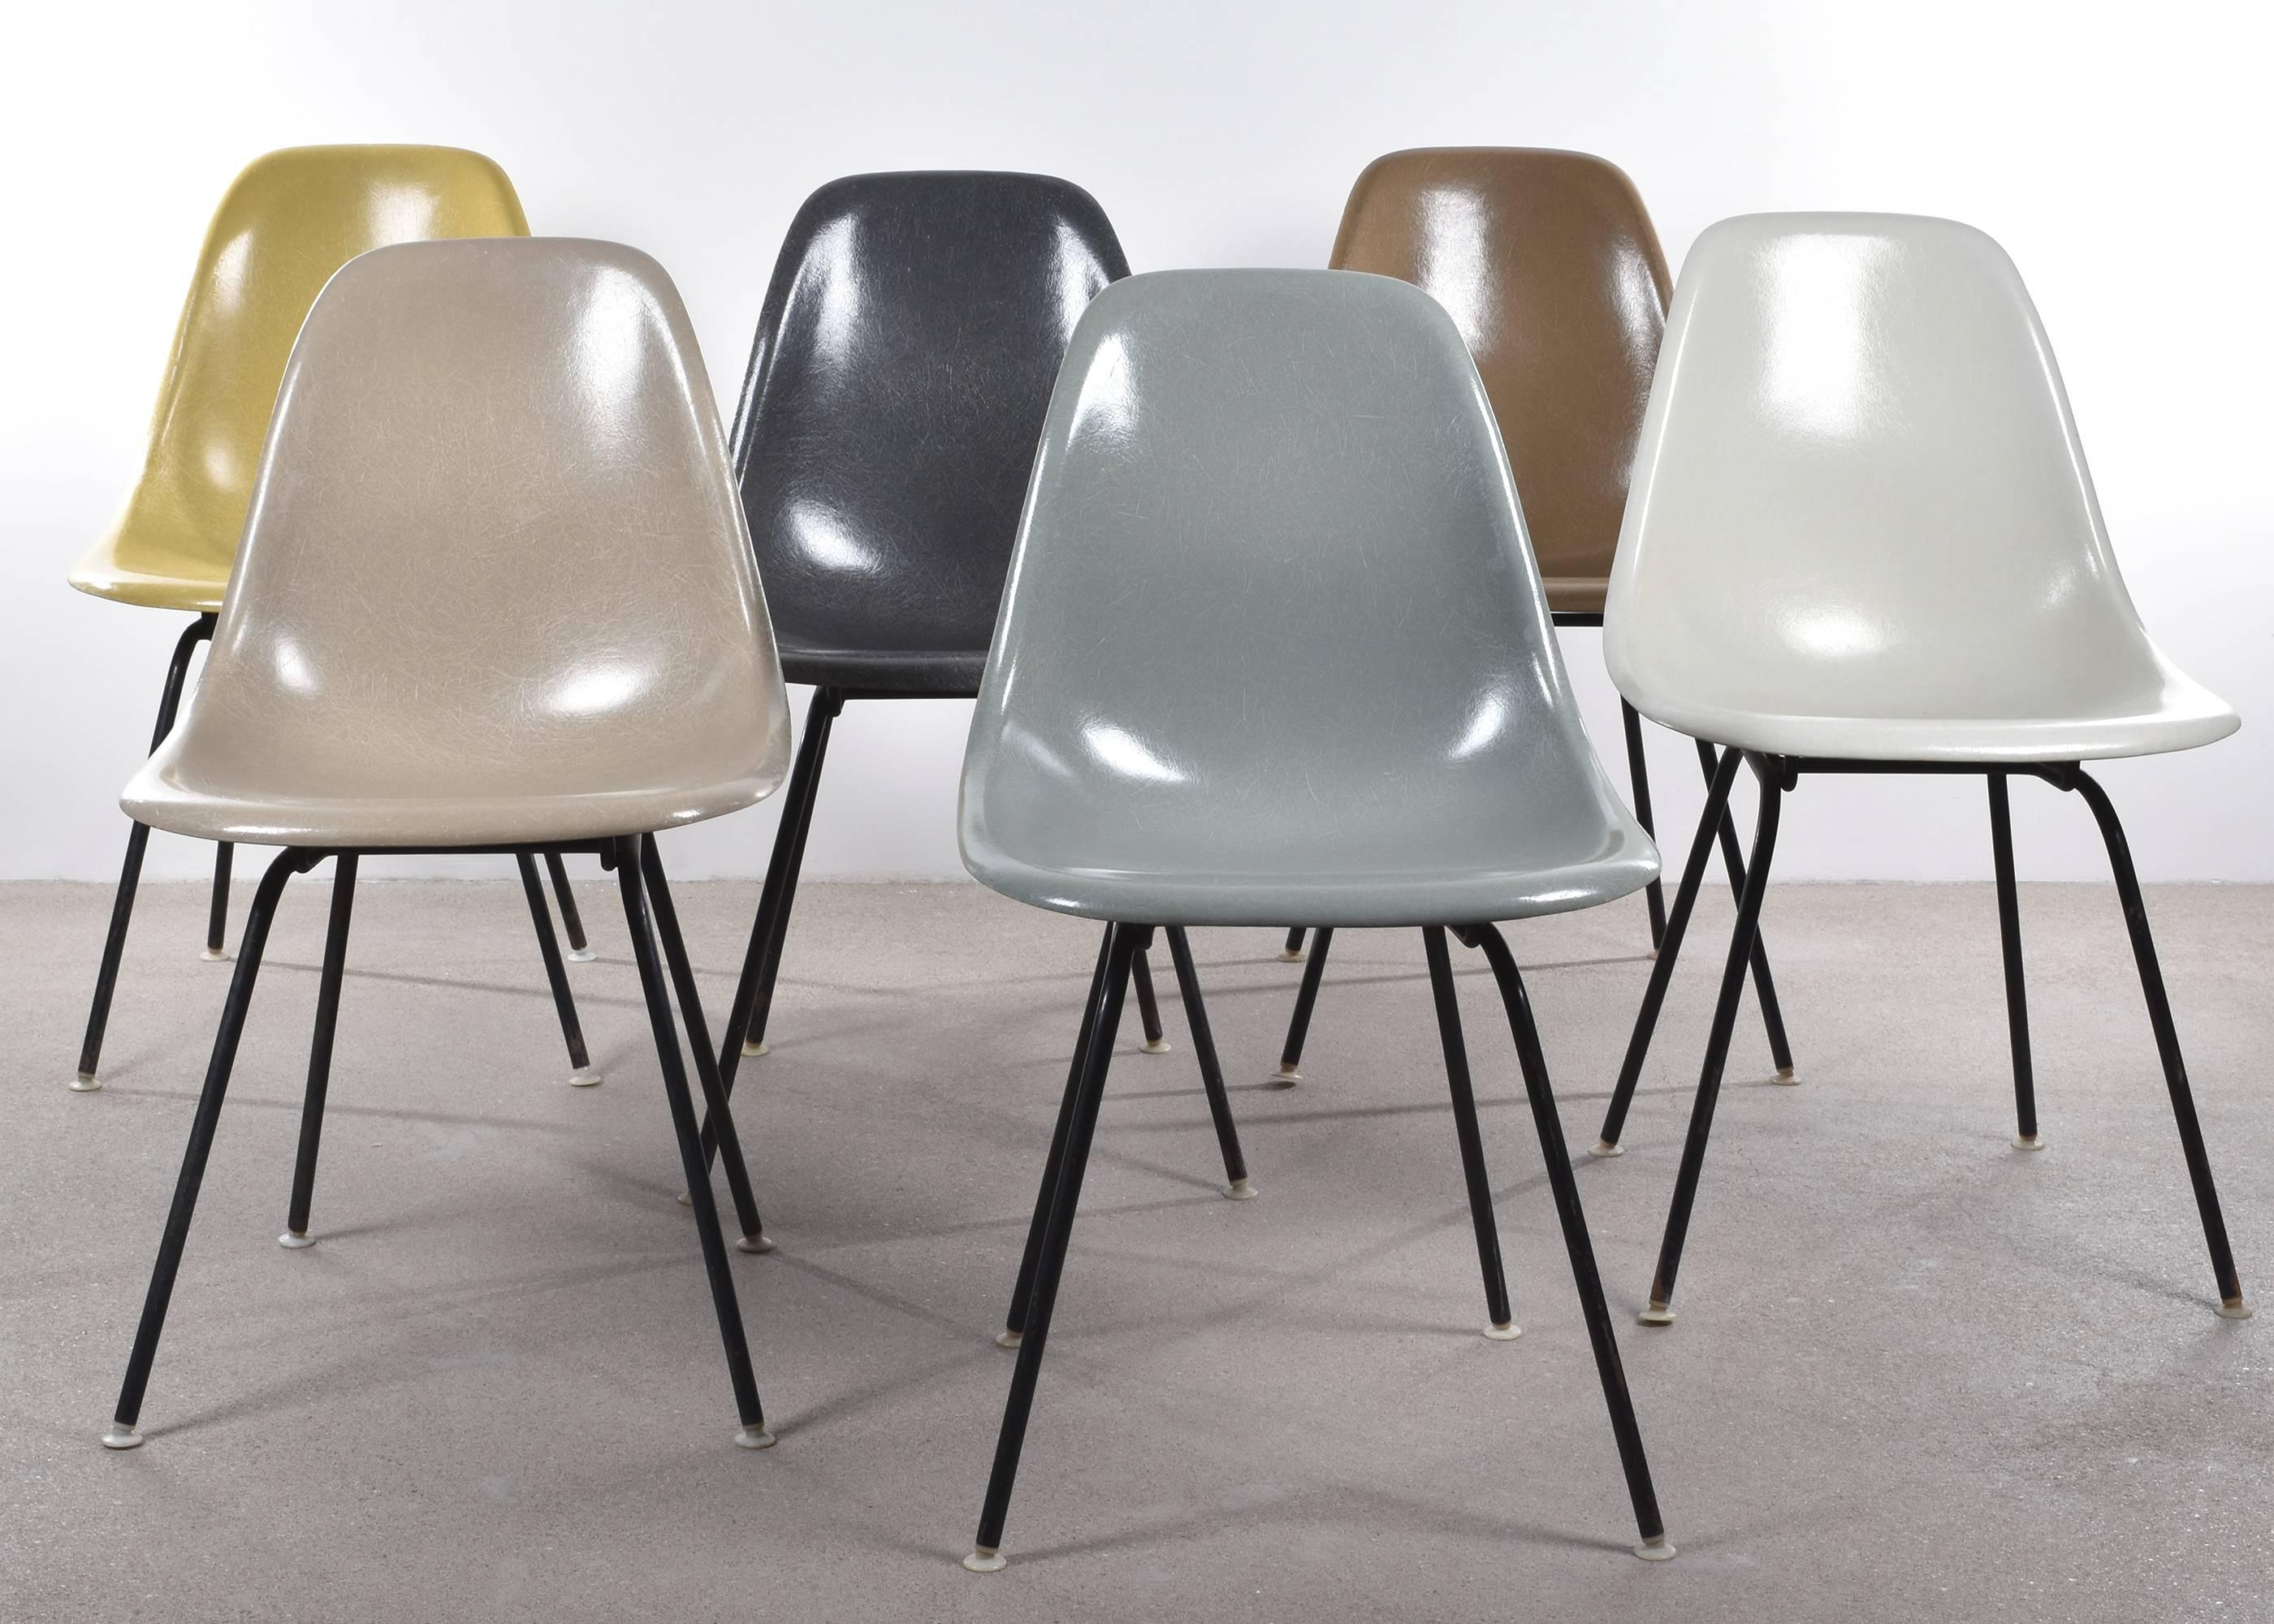 Beautiful iconic DSX chairs in natural colors: Parchment, greige, ochre light, elephant hide grey, sea foam green, tan light. Multiple sets in stock.
Shells are in very good or excellent condition with only slight traces of use. Replaced shock